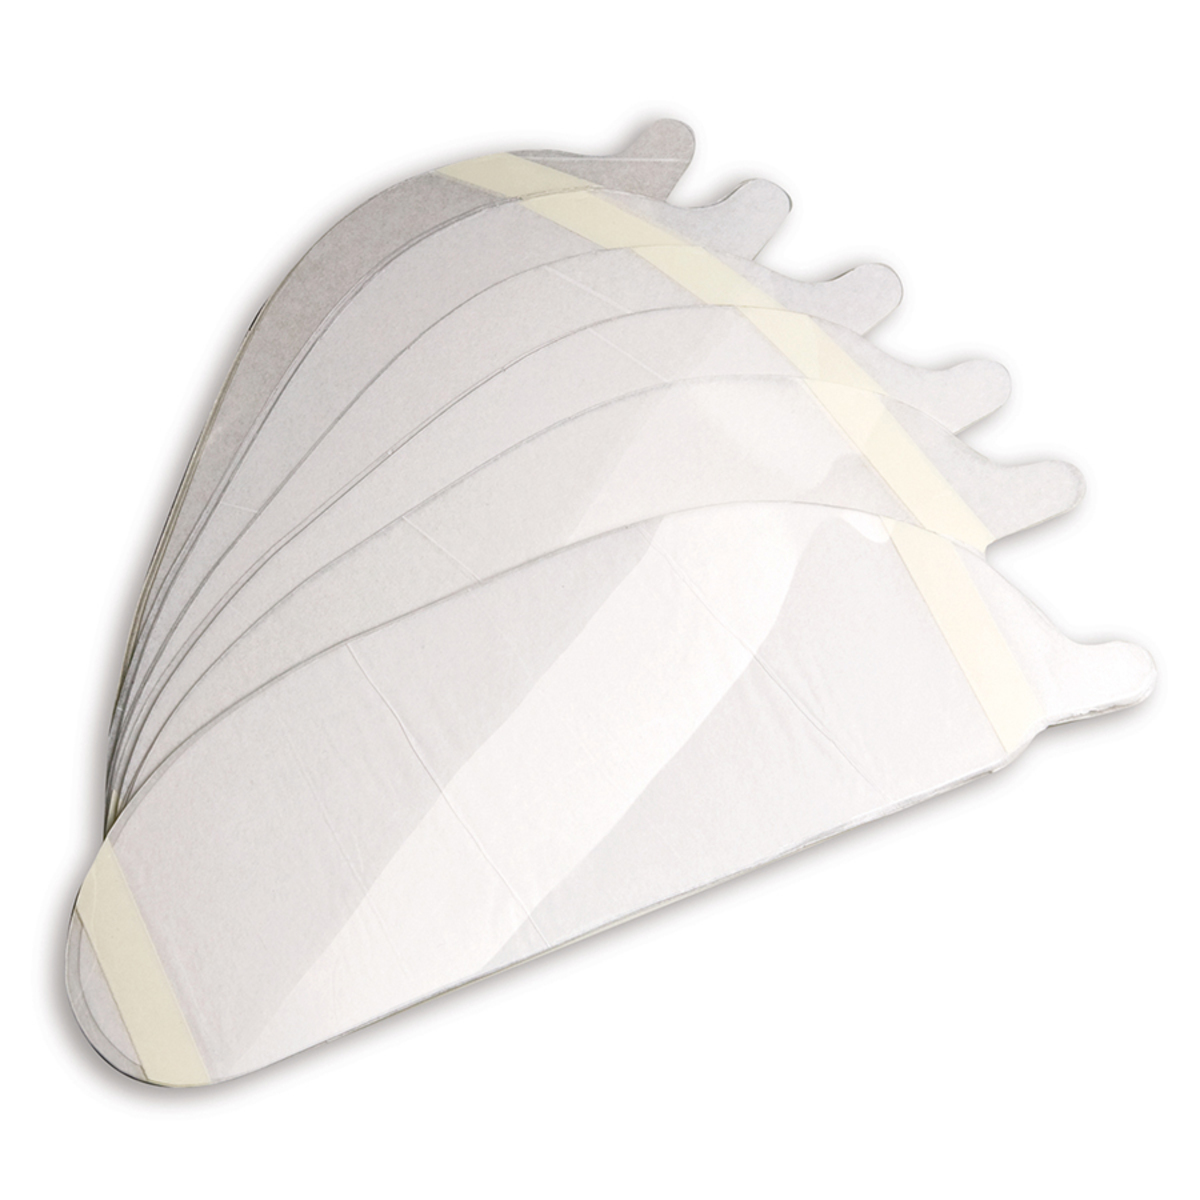 Allegro® Lens Cover Peel-Offs For Allegro Air Line Shield Respirators (25 Per Pack) (Availability restrictions apply.)